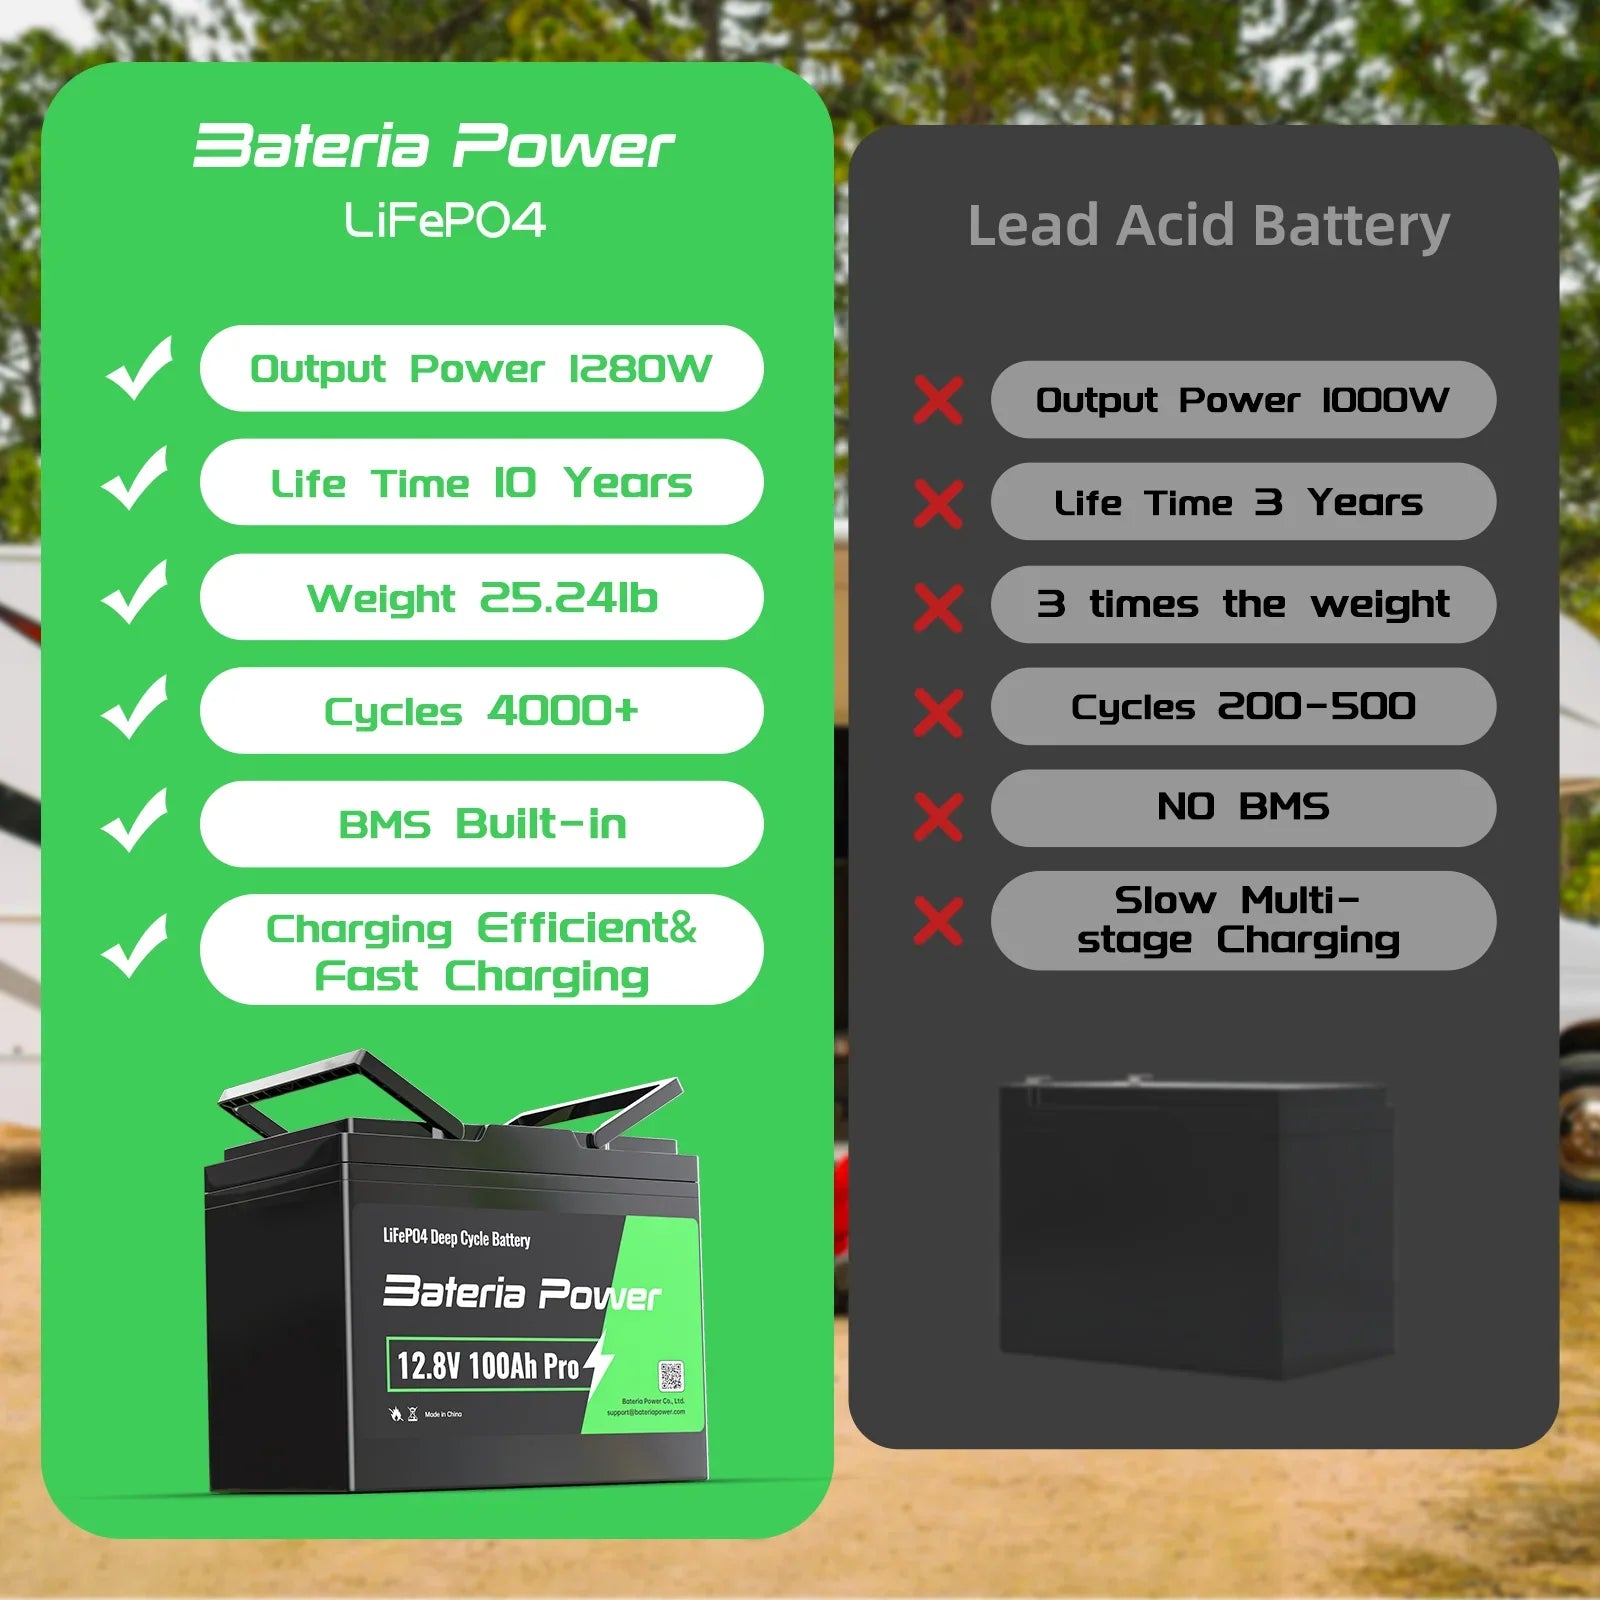  Lifepo4 Battery 12V 100ah Lithium Battery Built-in 100A Bms